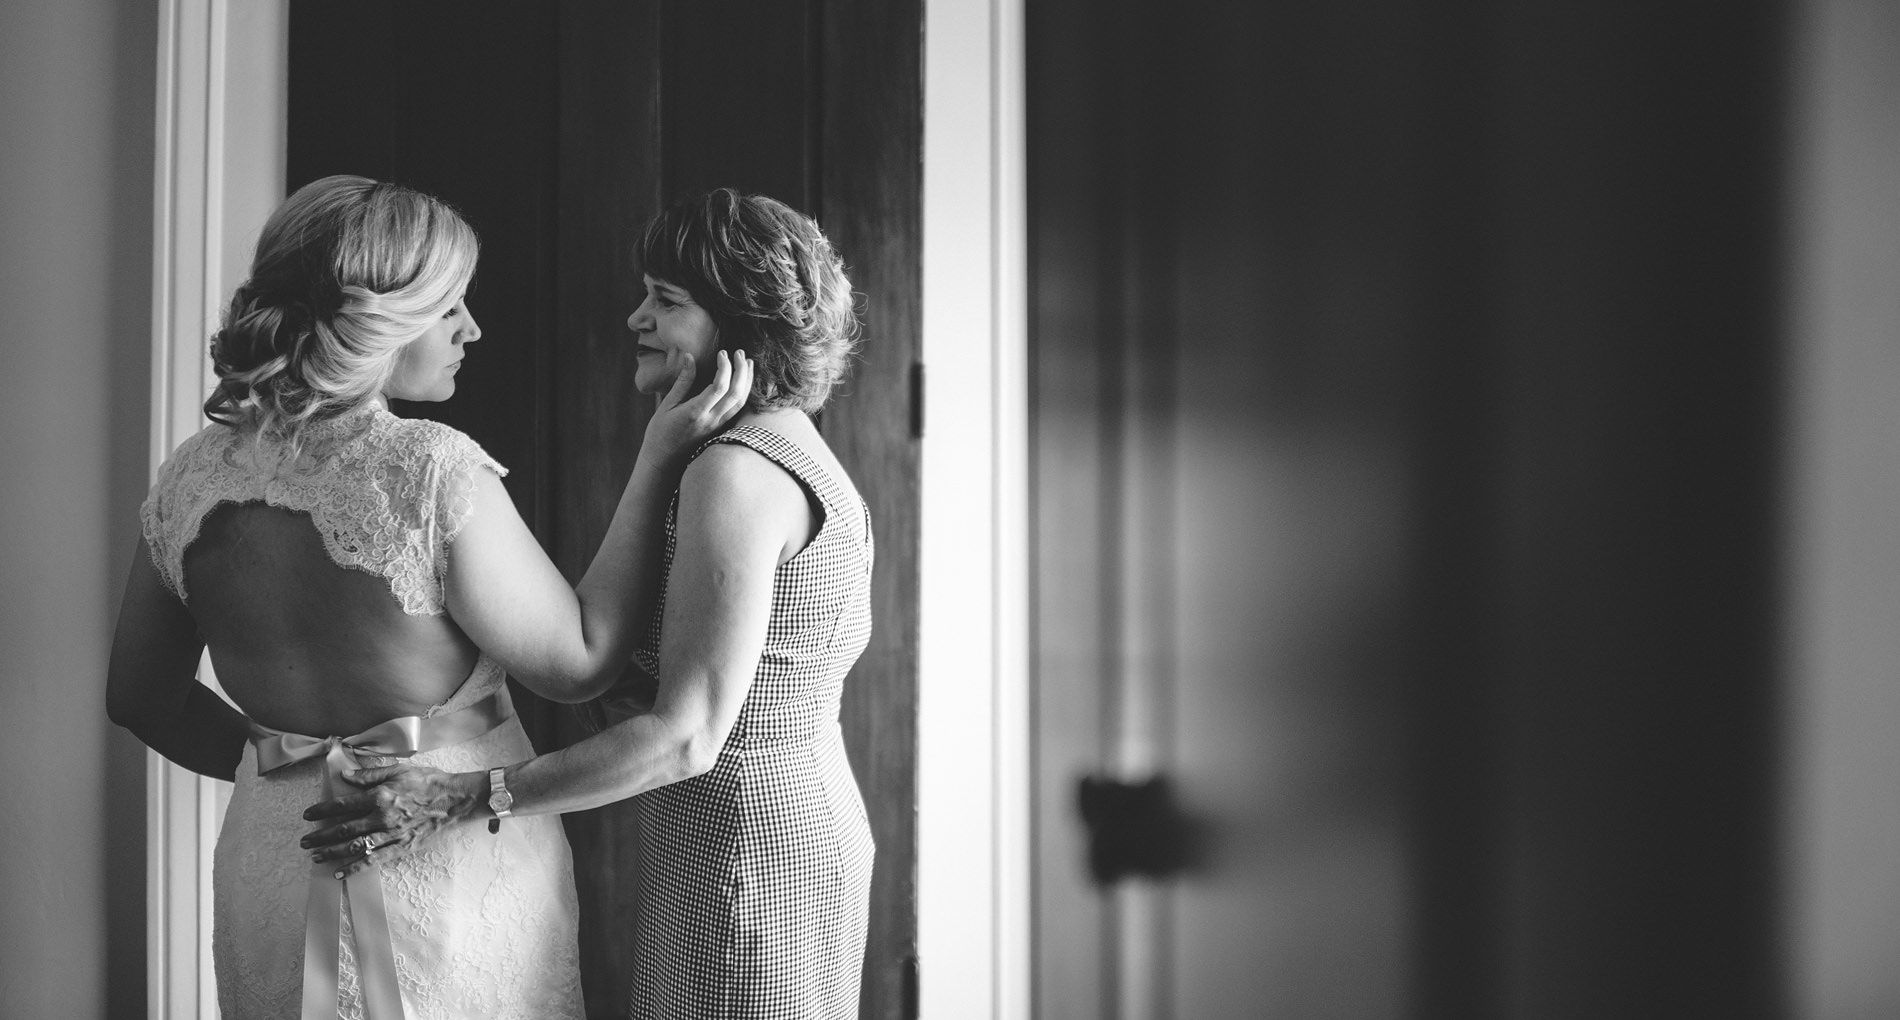 tender moment between mother and her daughter on wedding day